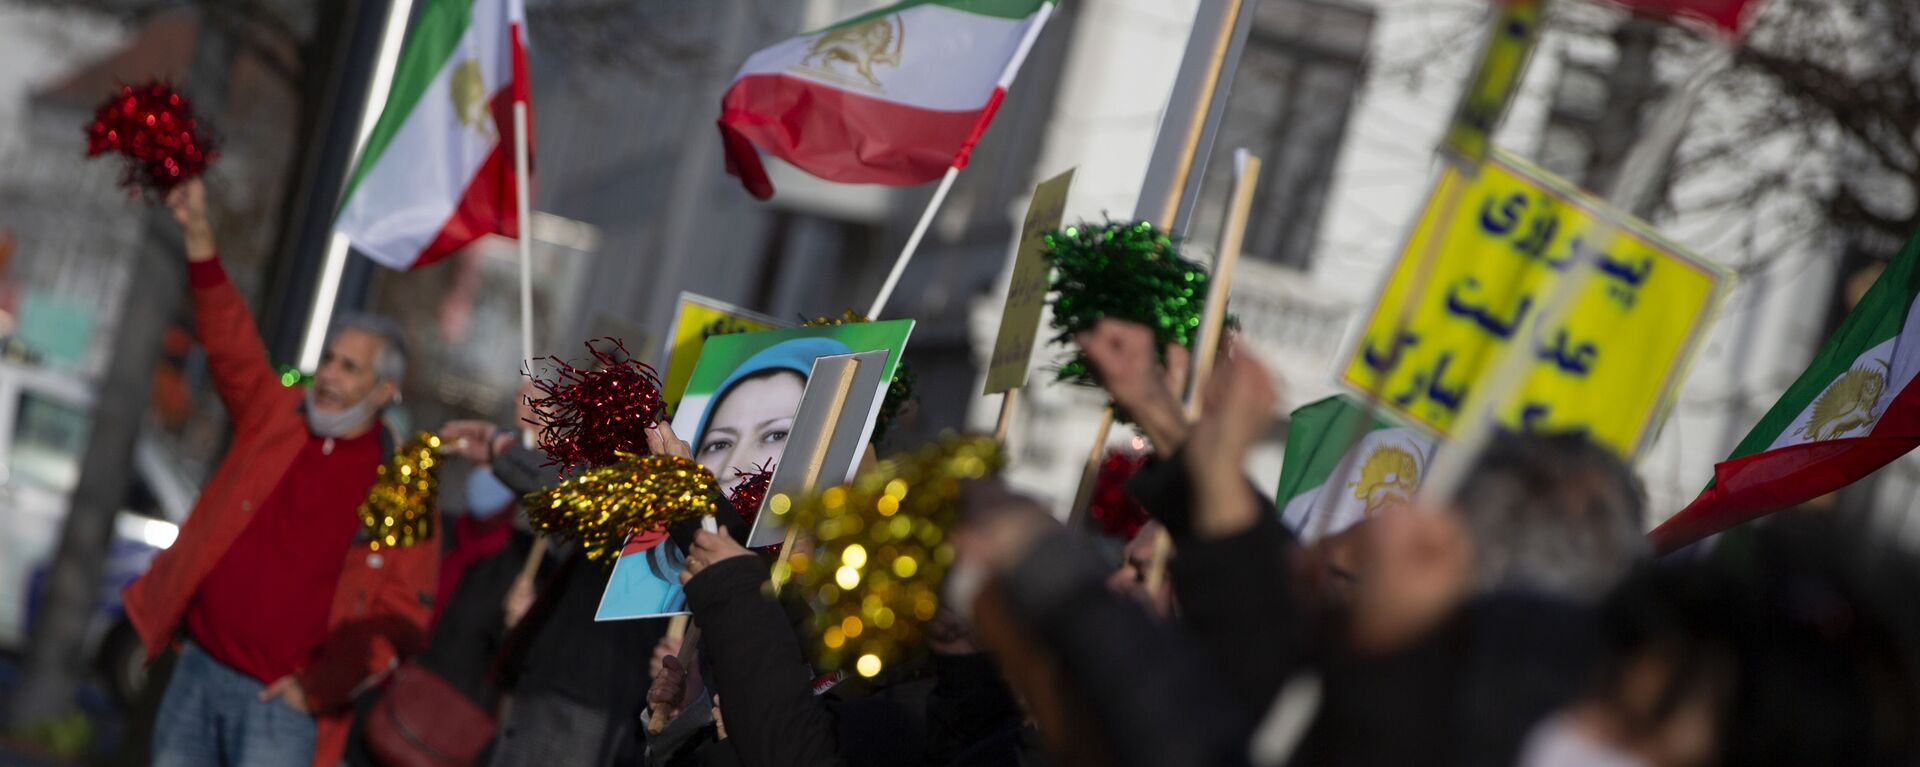 People wave flags and confetti after the trial of four persons, including an Iranian diplomate and Belgian-Iranian couple at the courthouse in Antwerp, Belgium, Thursday, Feb. 4, 2021. - Sputnik International, 1920, 04.02.2021